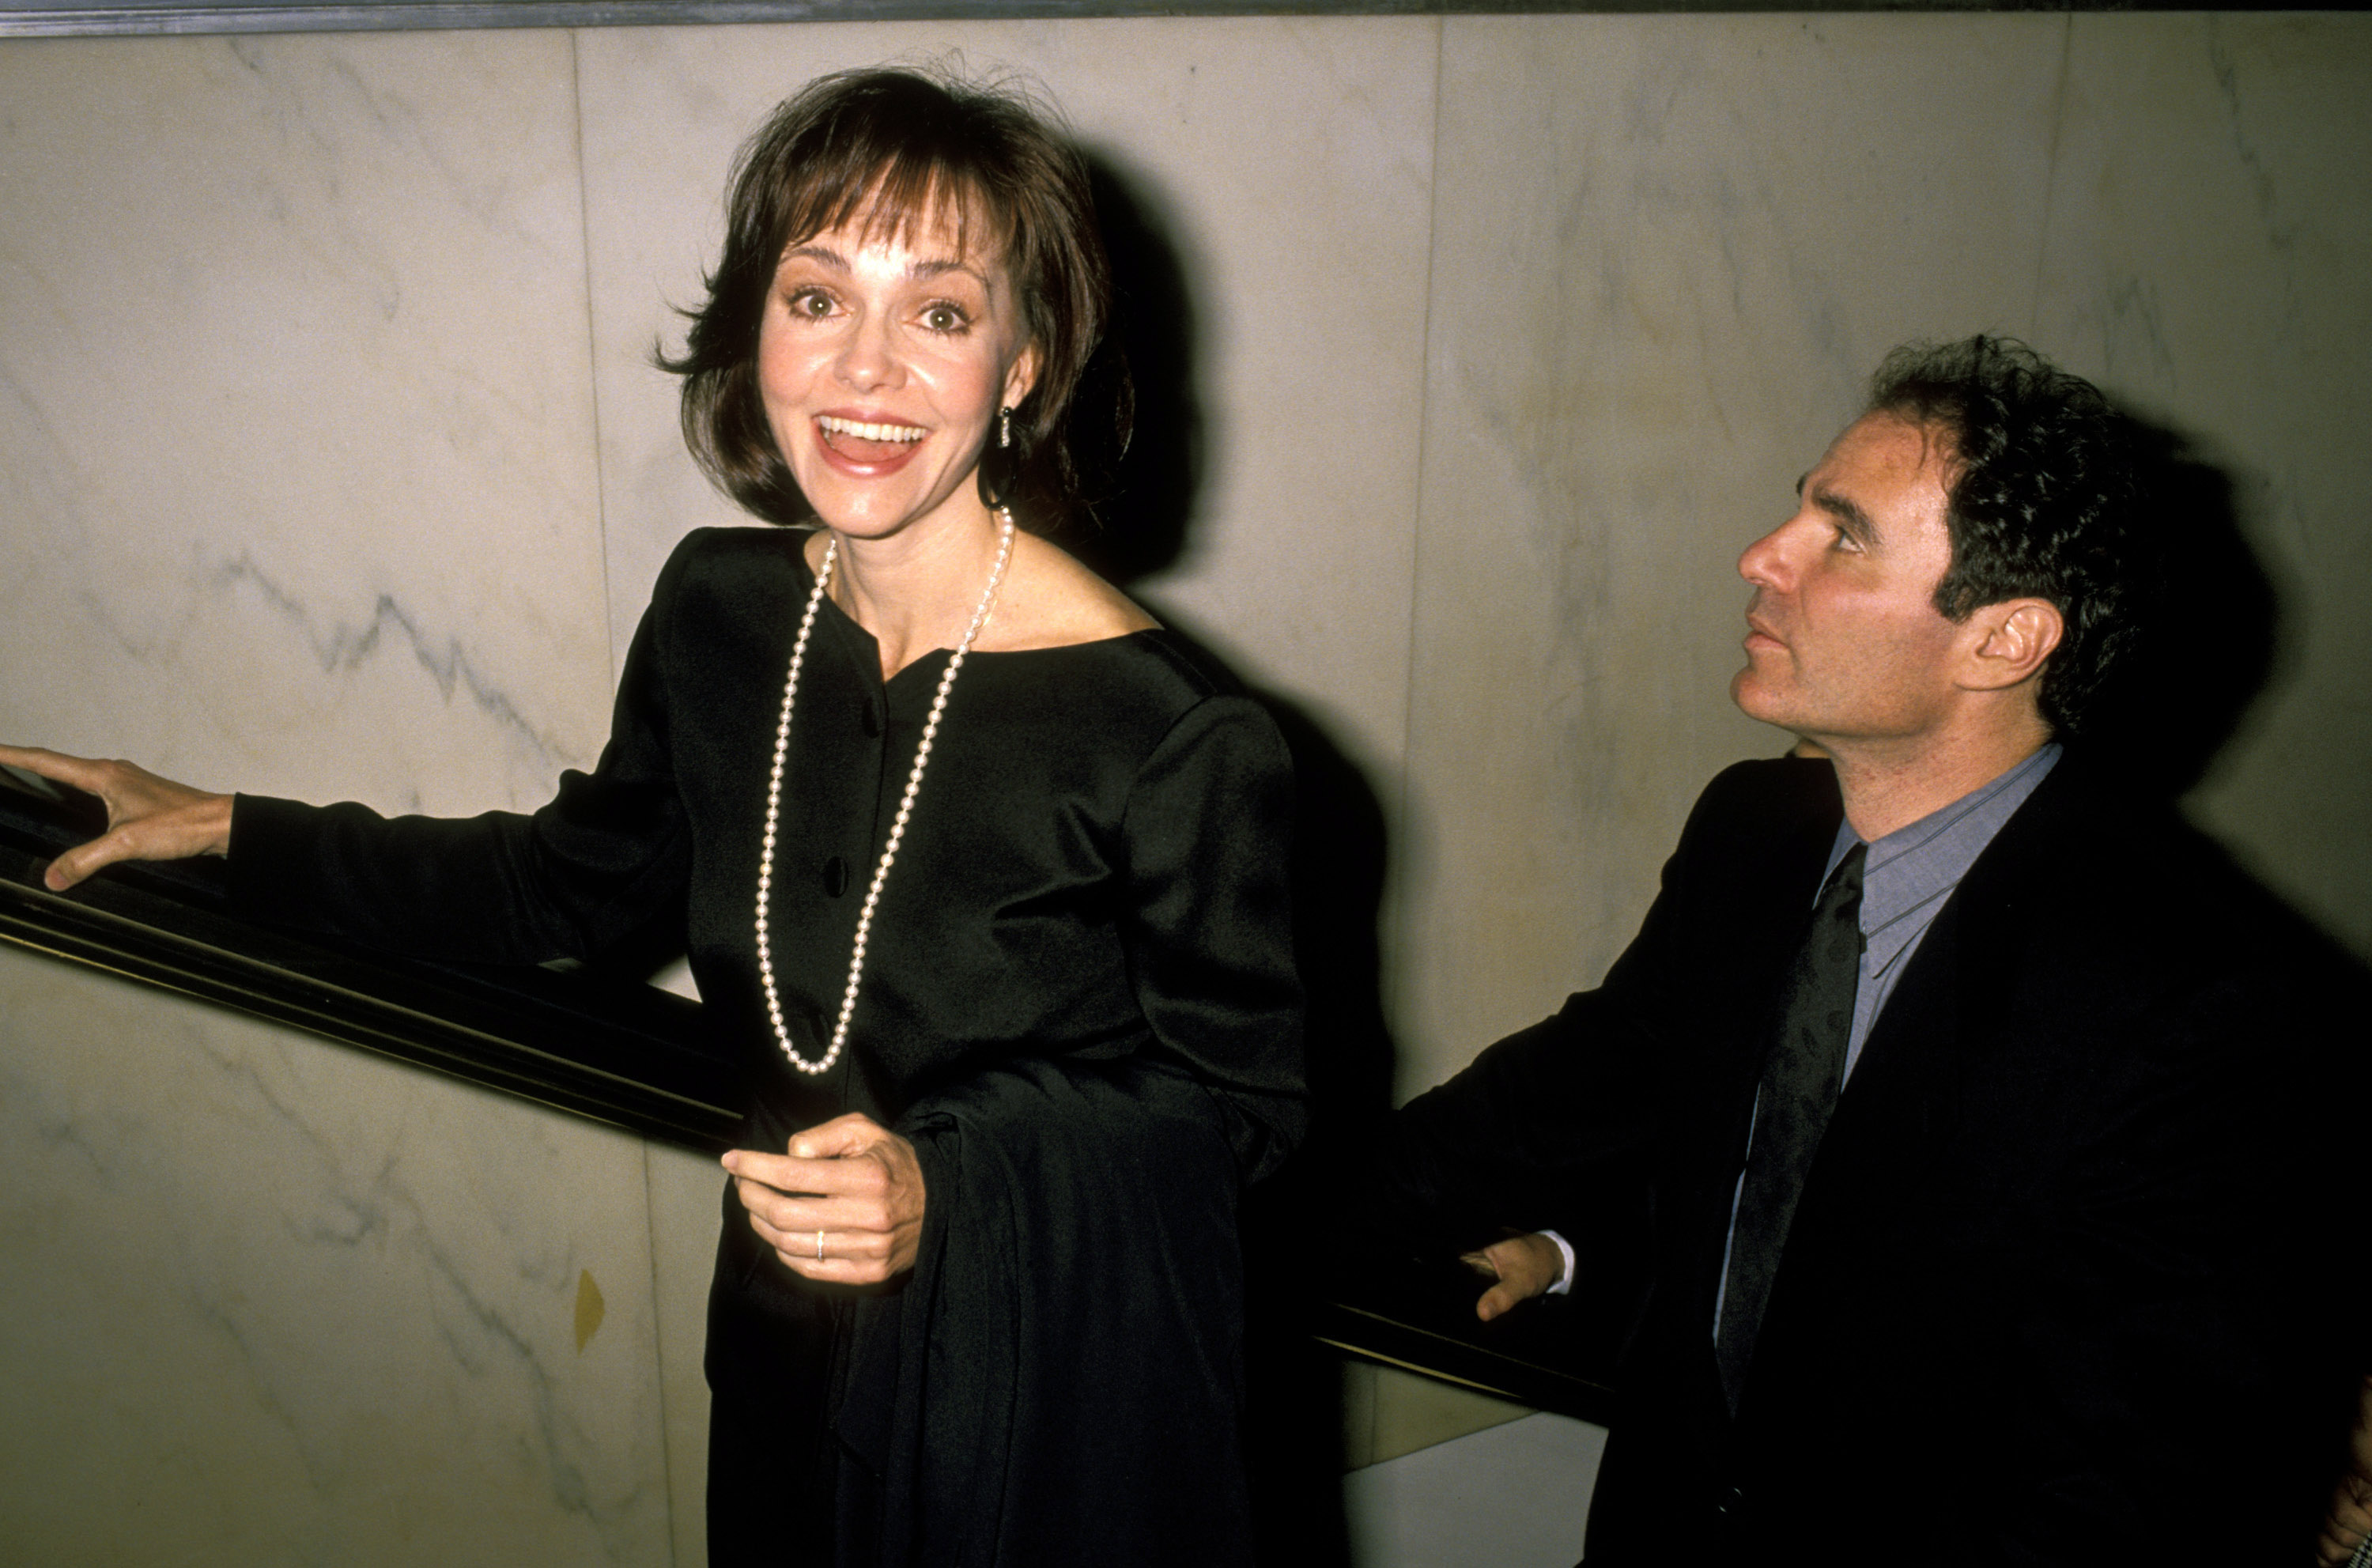 Sally Field and Husband Alan Greisman during the premiere party for "Steel Magnolias" at the New York Hilton Hotel in New York City on November 5, 1989. | Source: Getty Images